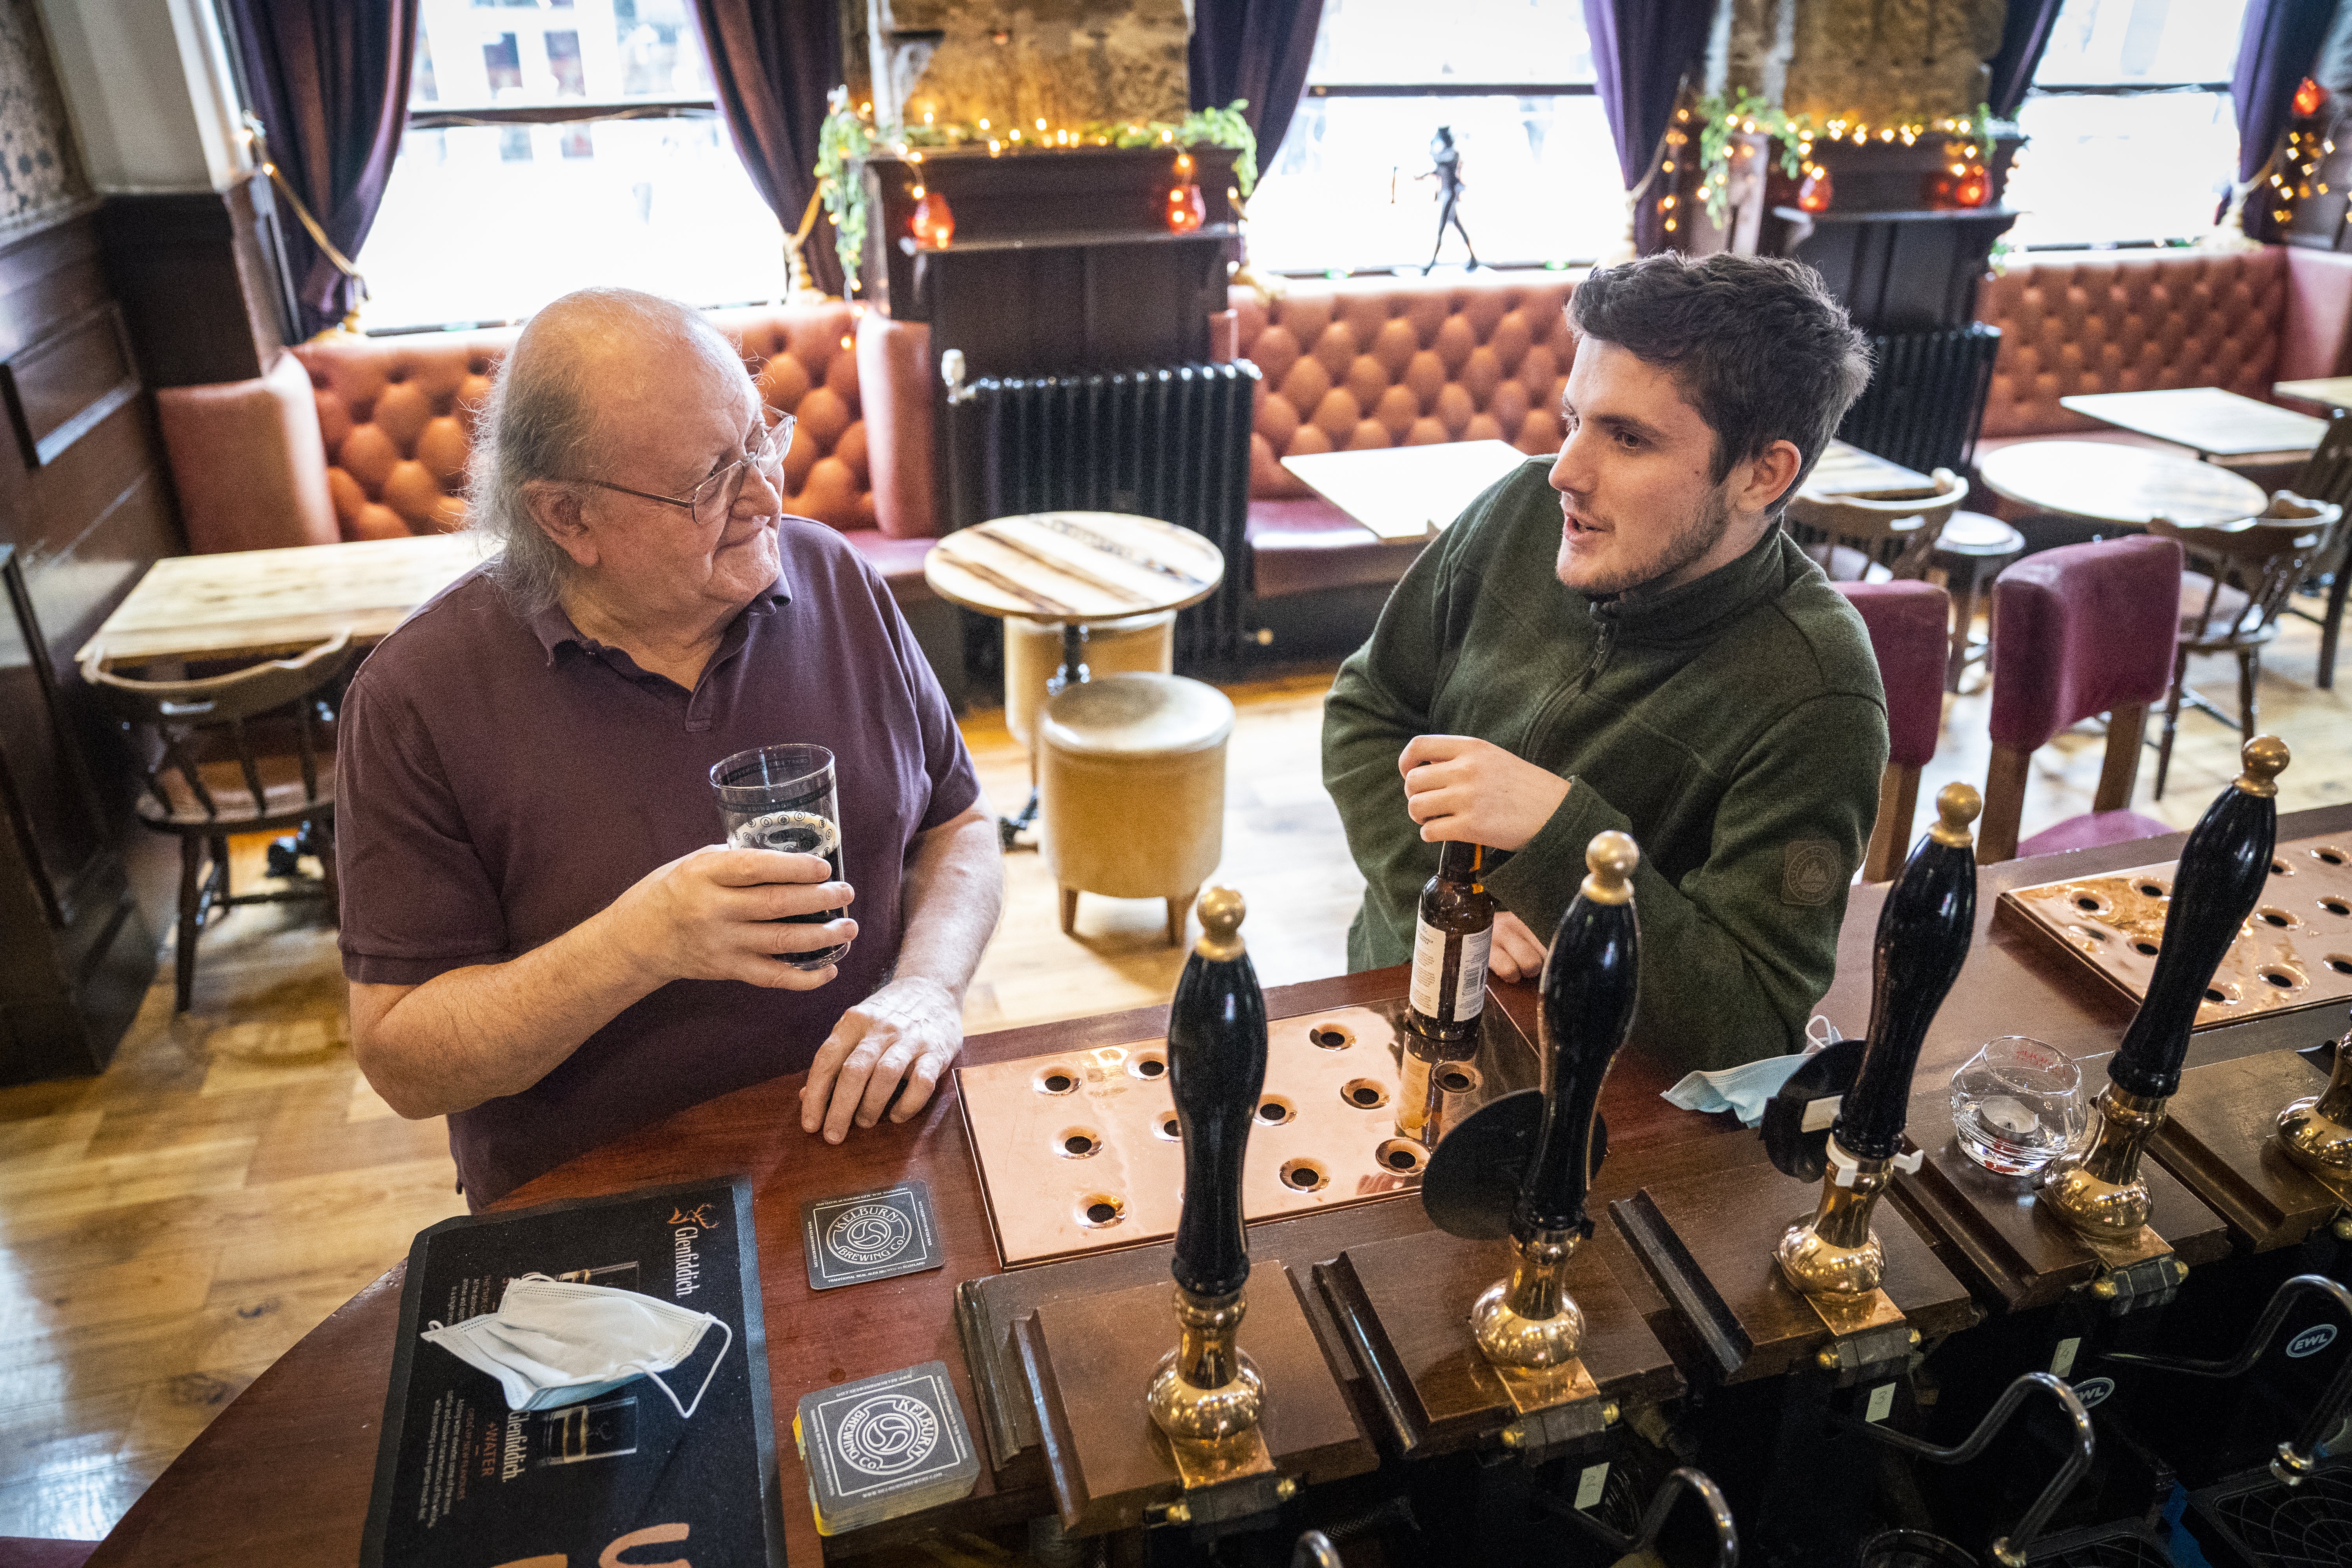 Customers drink at the bar in the No1 High Street pub on Edinburgh’s Royal Mile (Jane Barlow/PA)